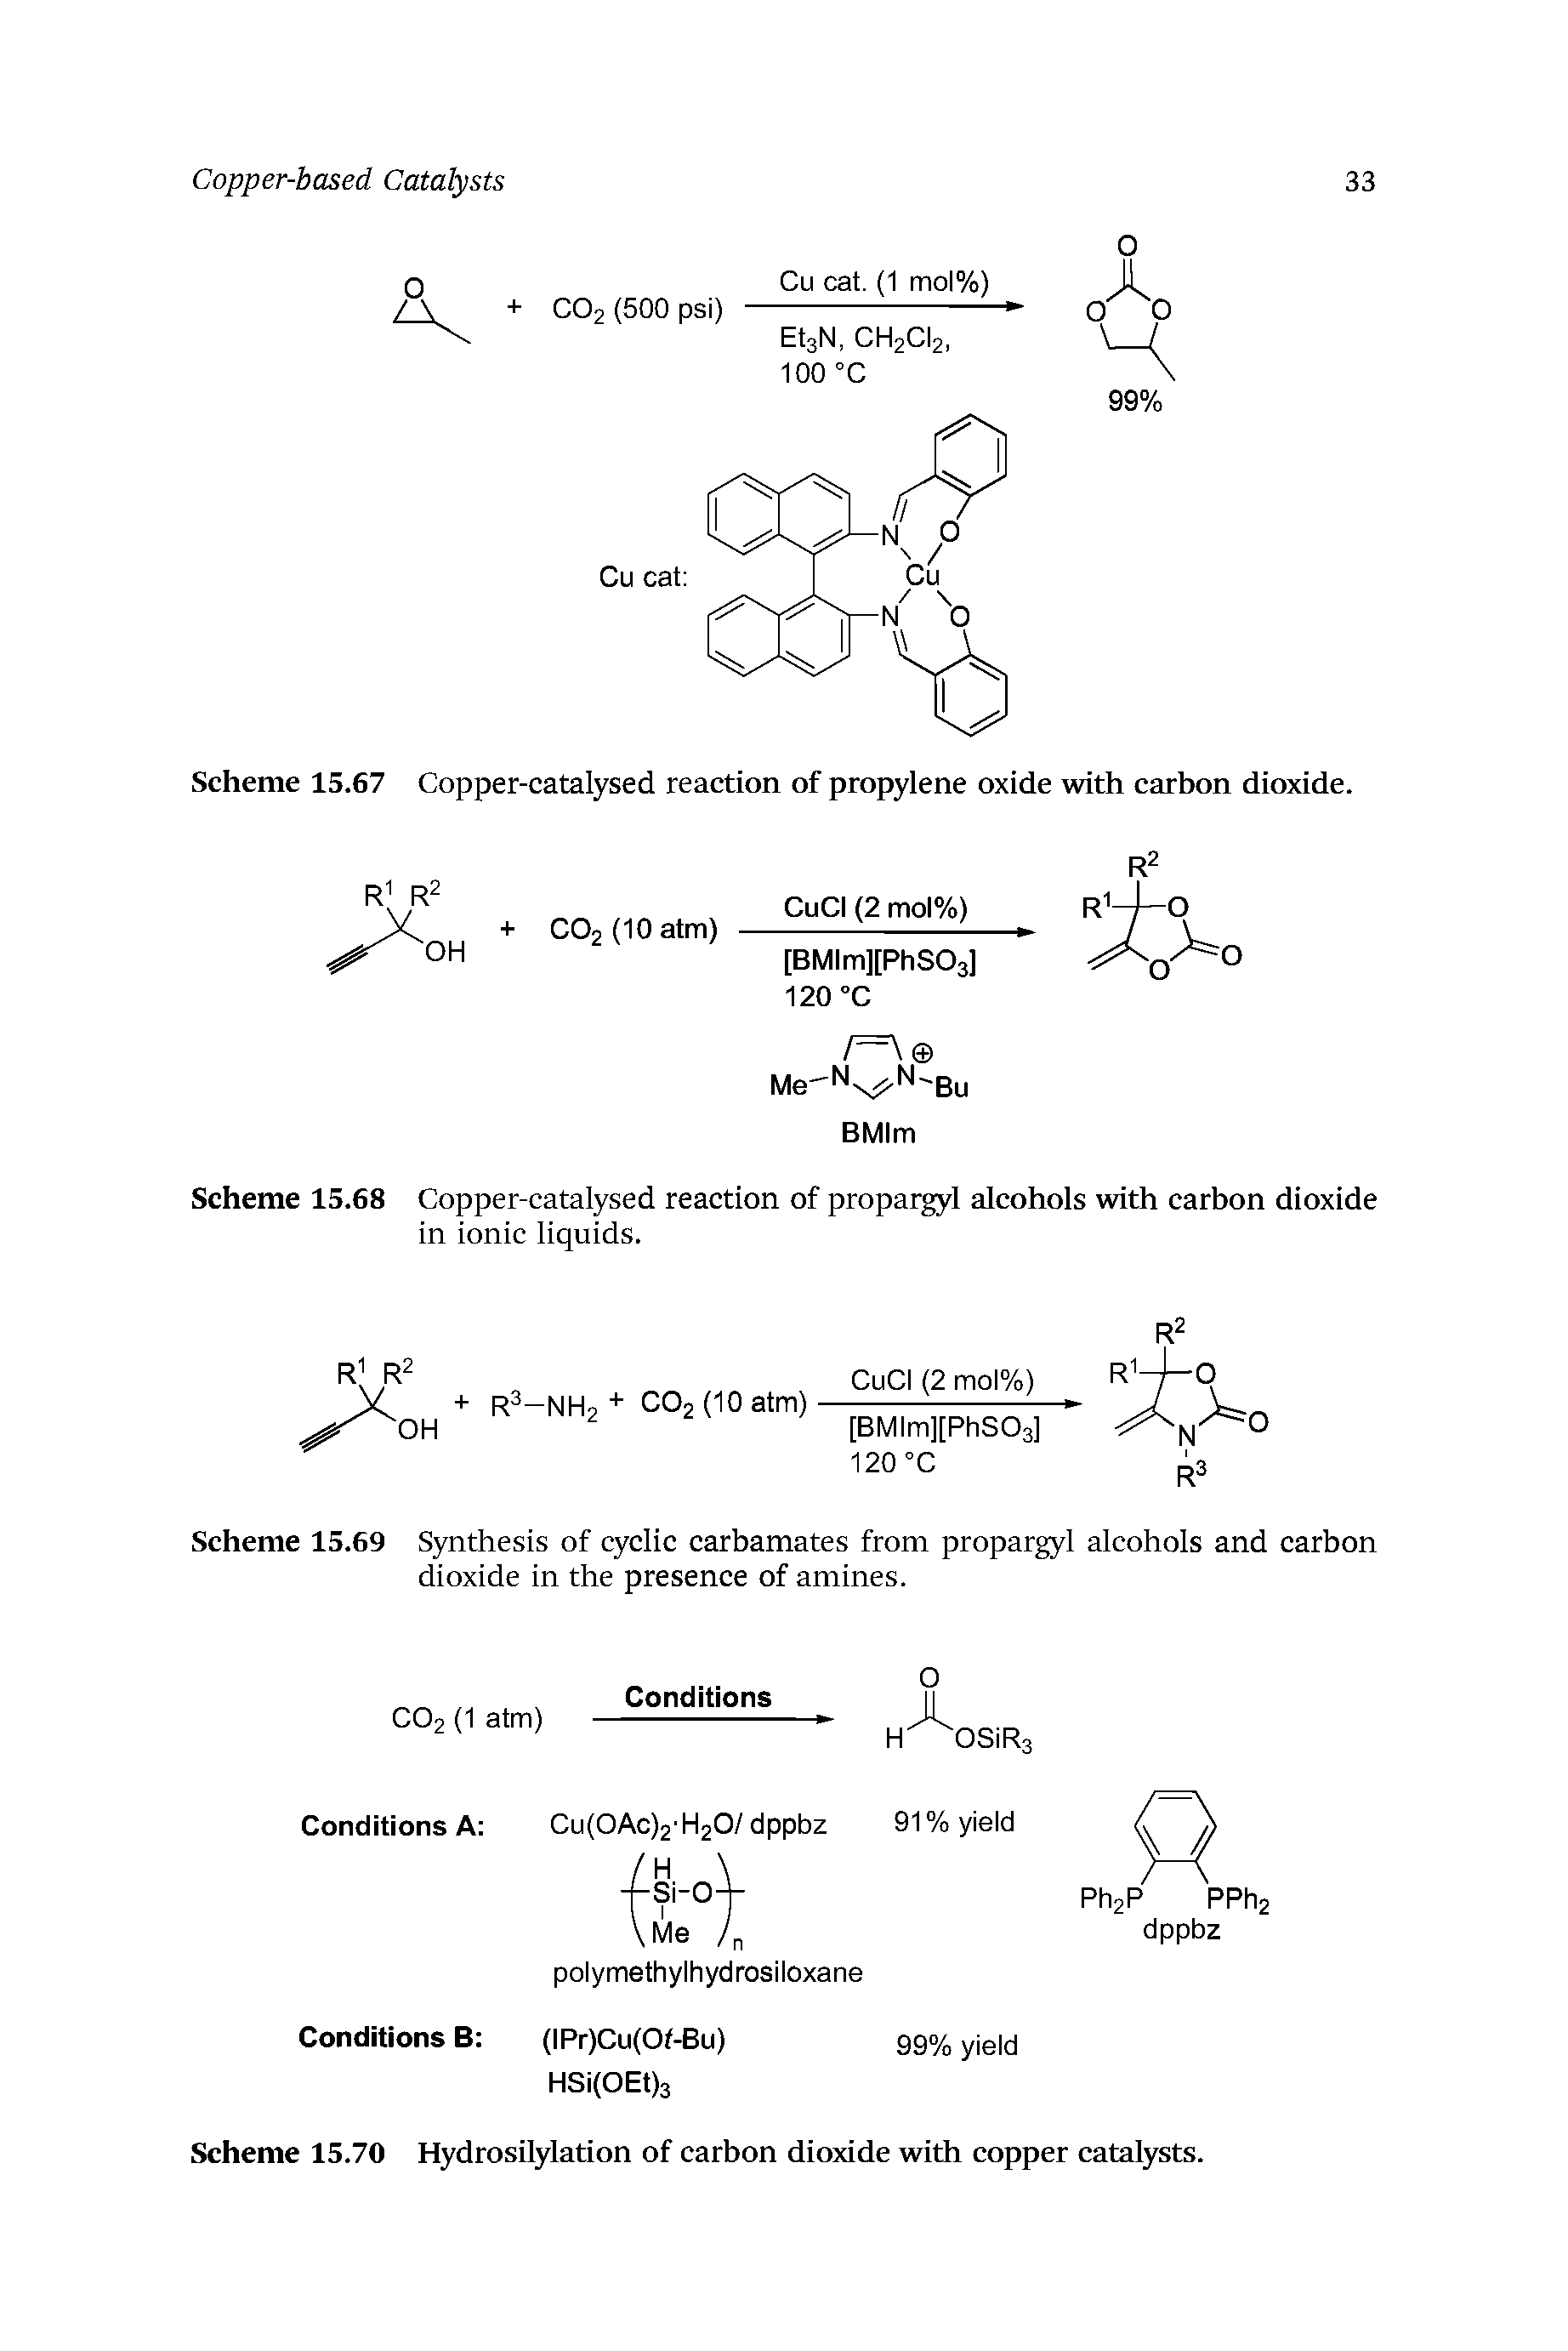 Scheme 15.67 Copper-catalysed reaction of propylene oxide with carbon dioxide.